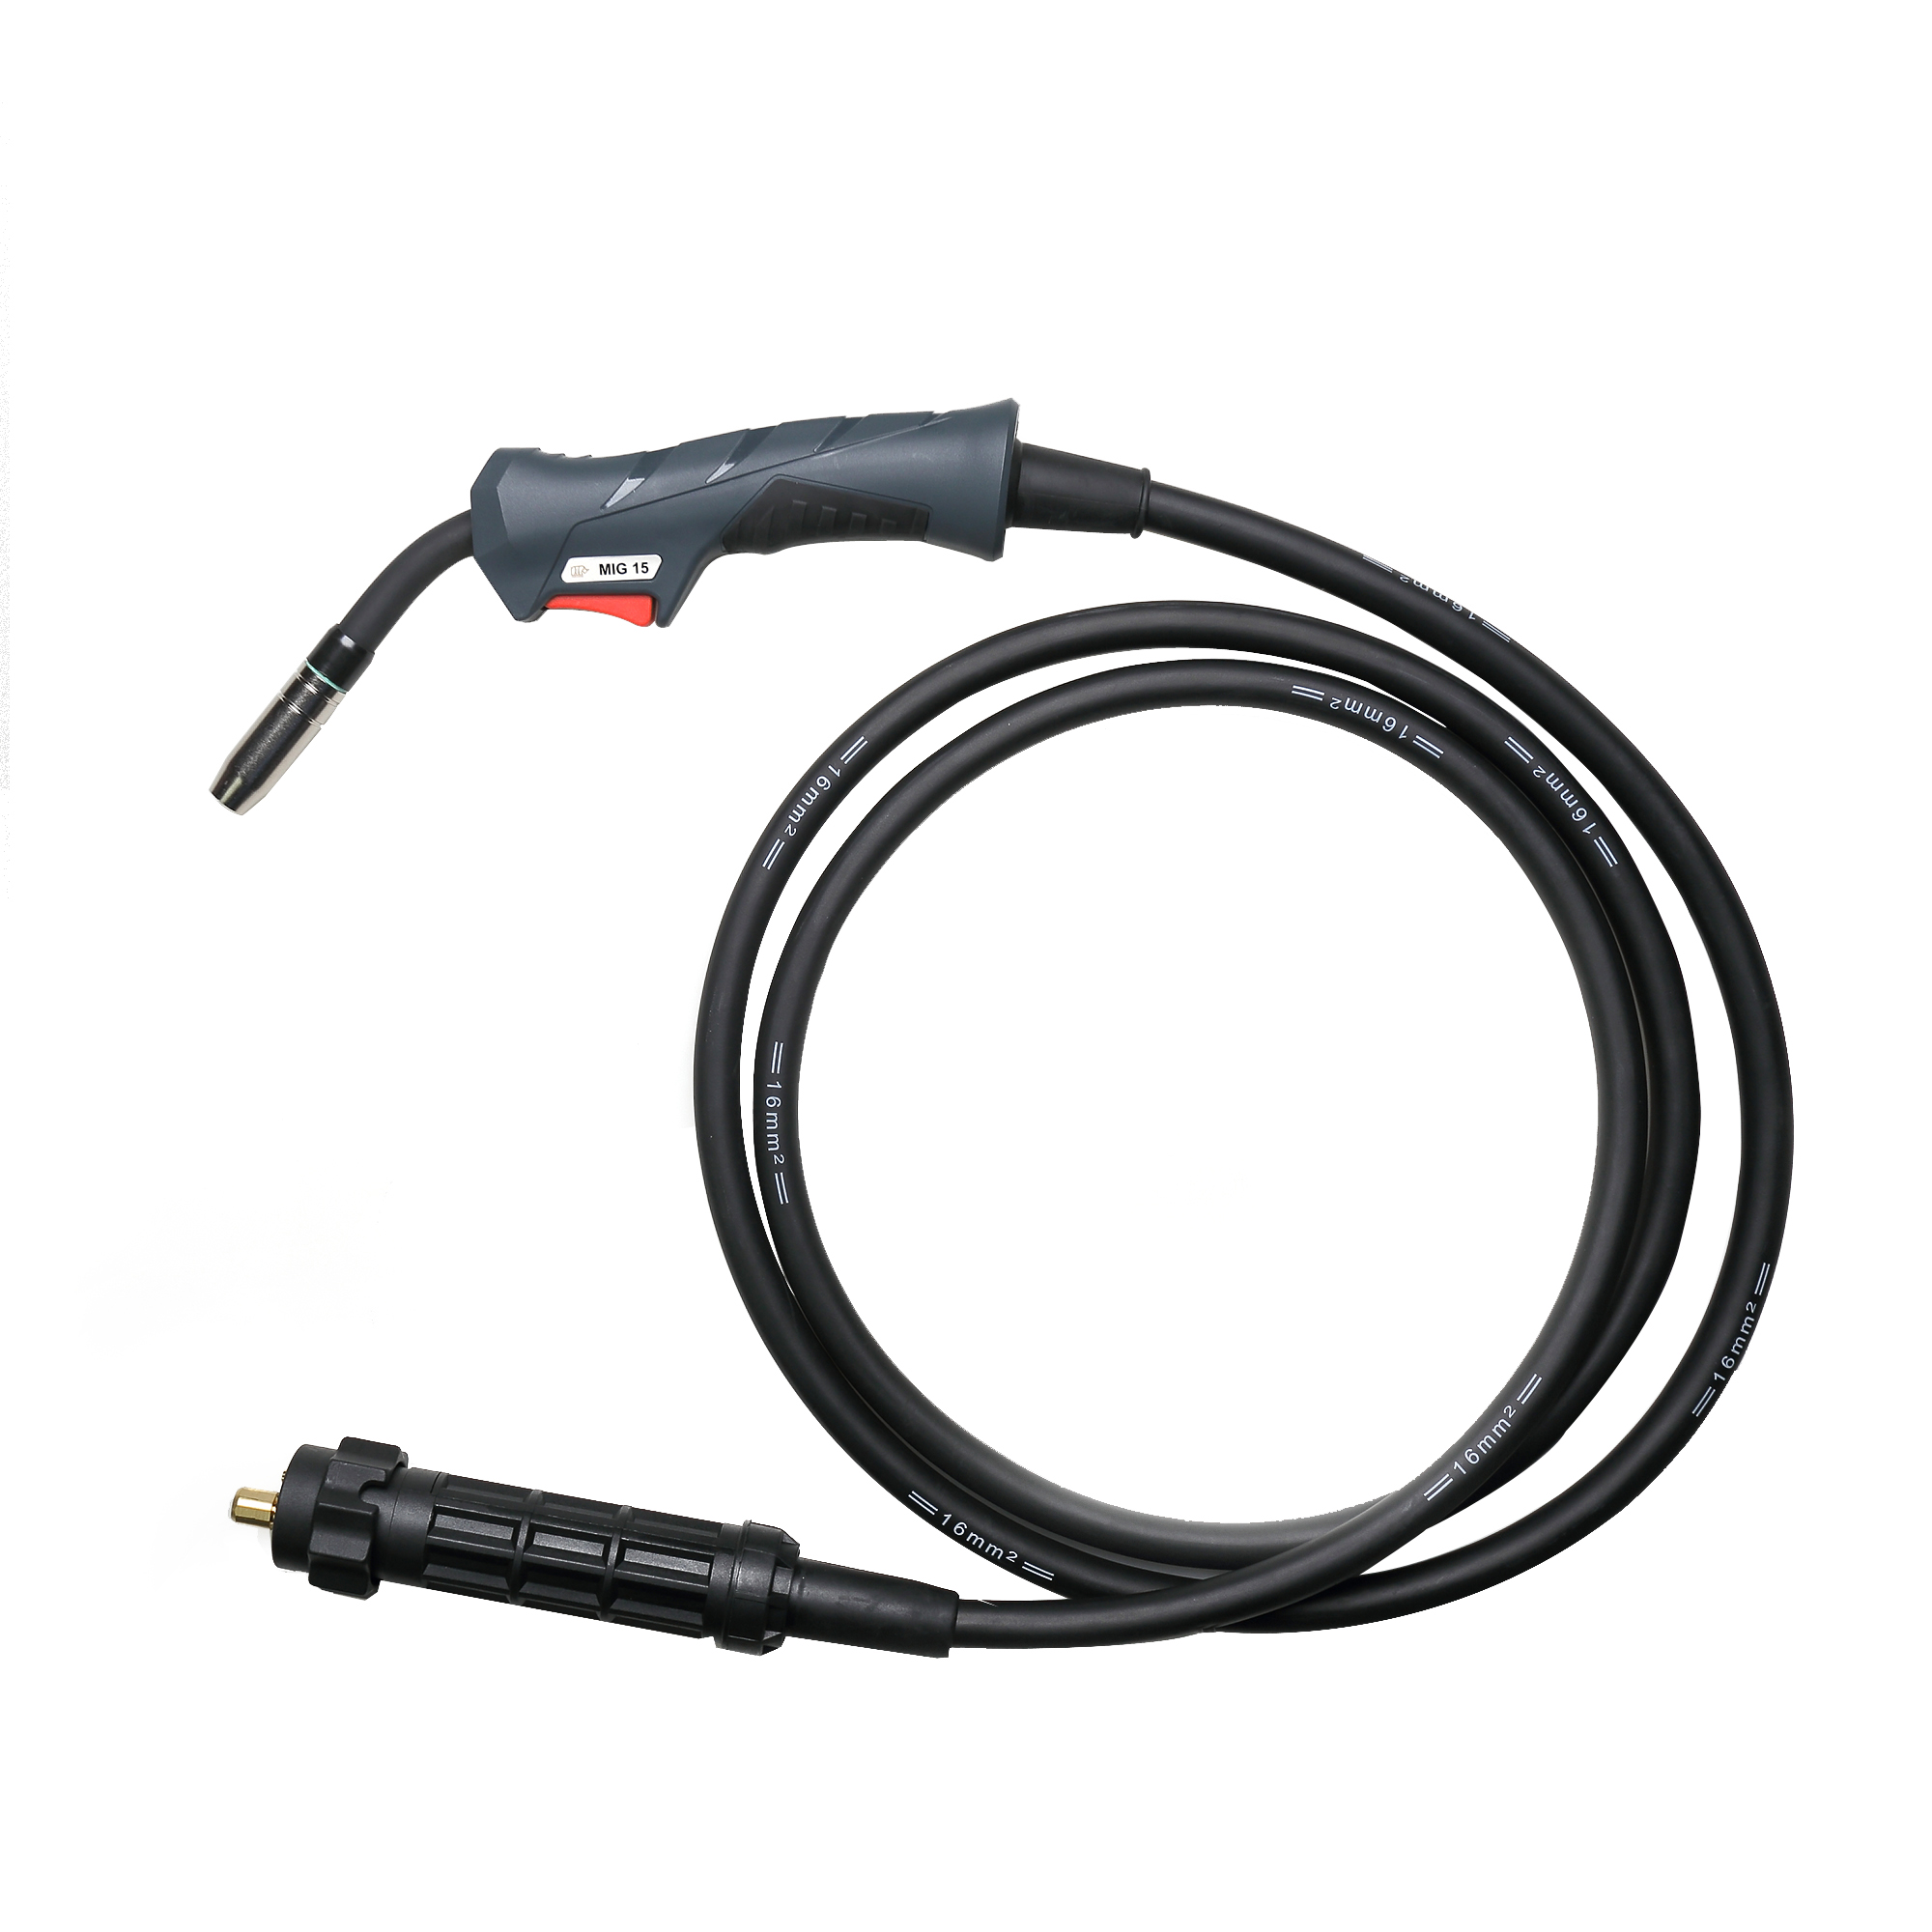 MB15 MIG Welding Torch Co2 Torch 180A 5M With Euro Connector Chinese manufacturer 